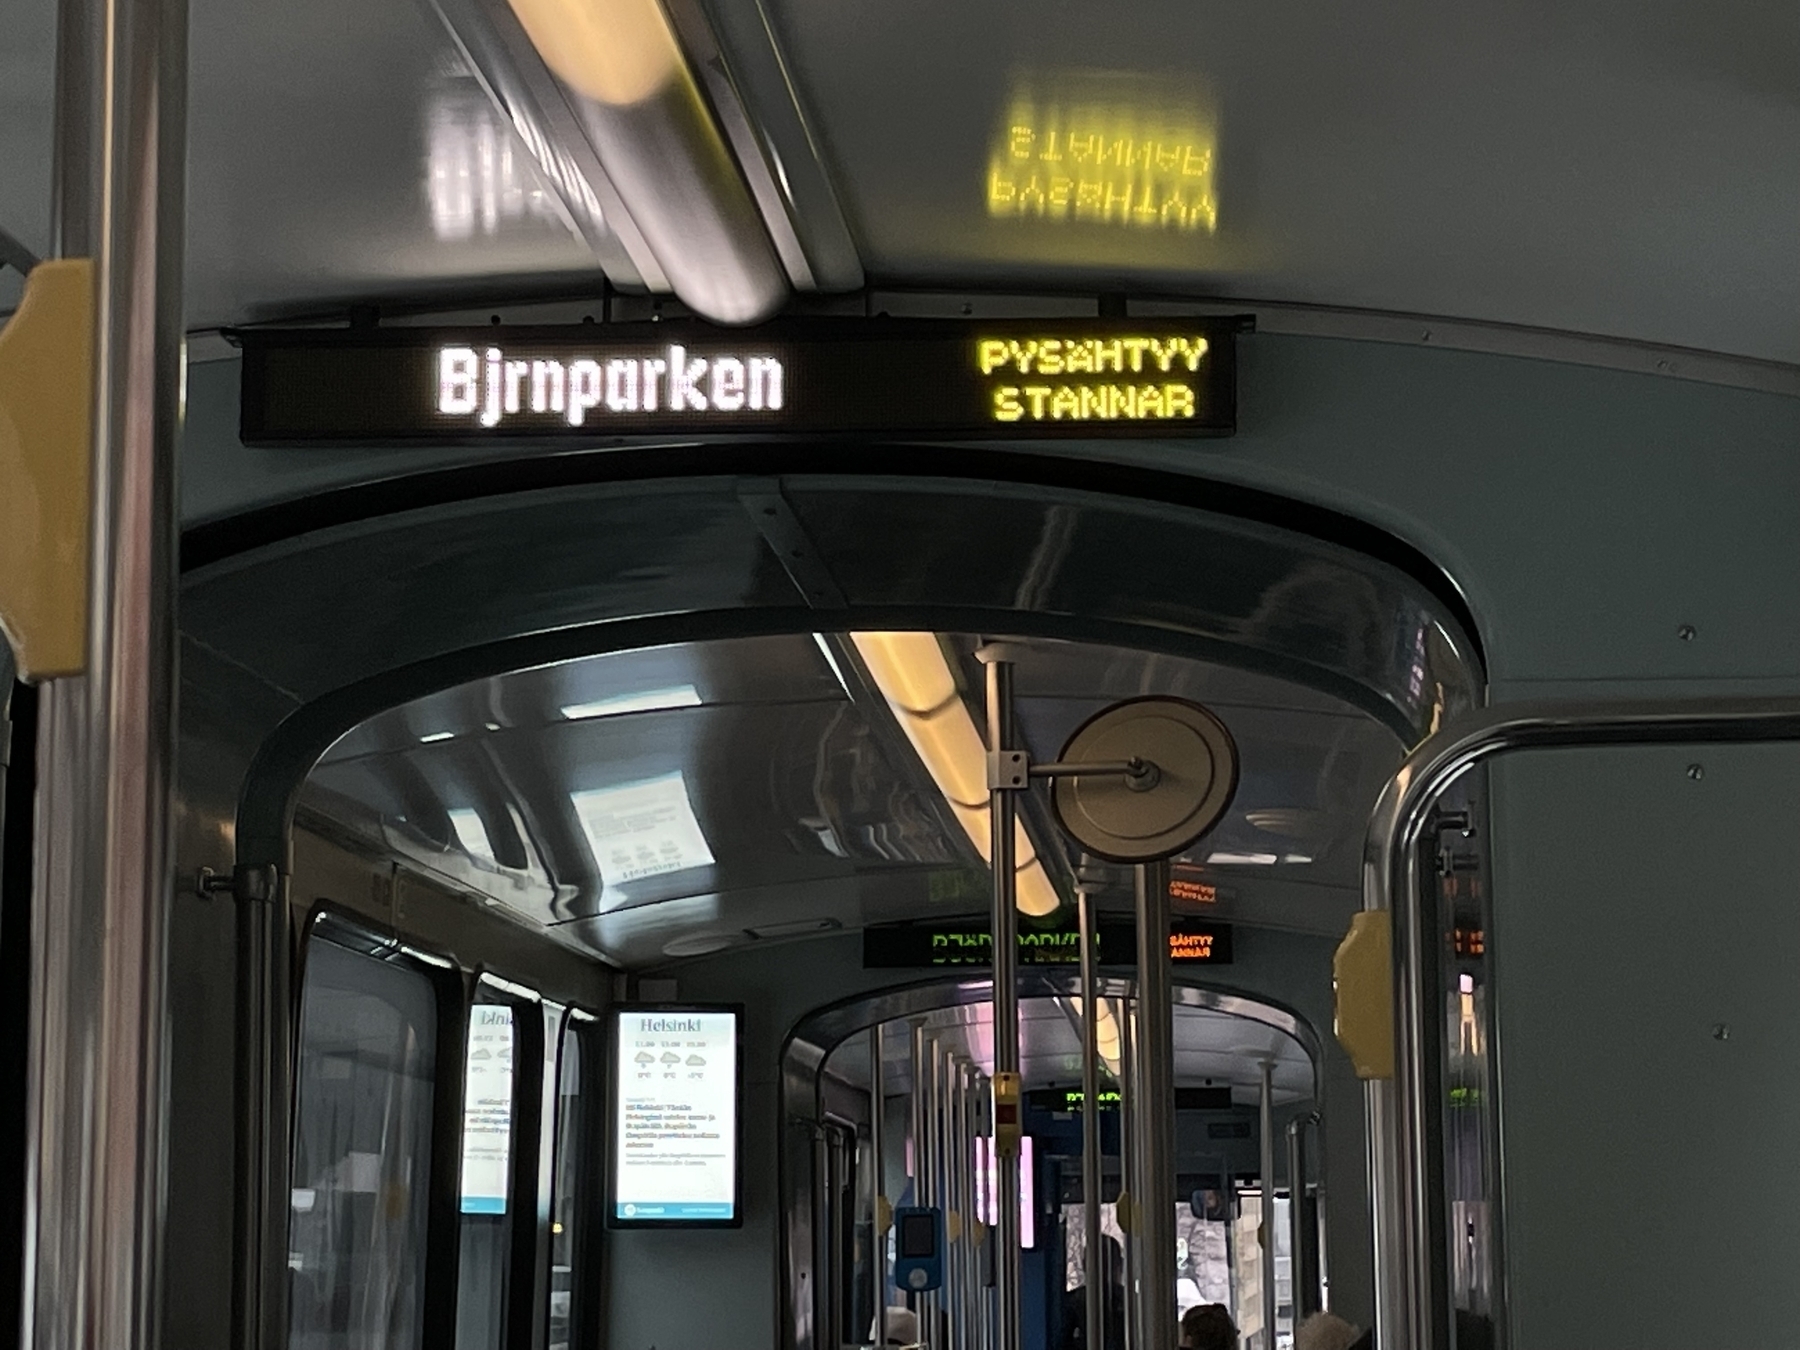 Sign in a tram with the text ”Bjrnparken”